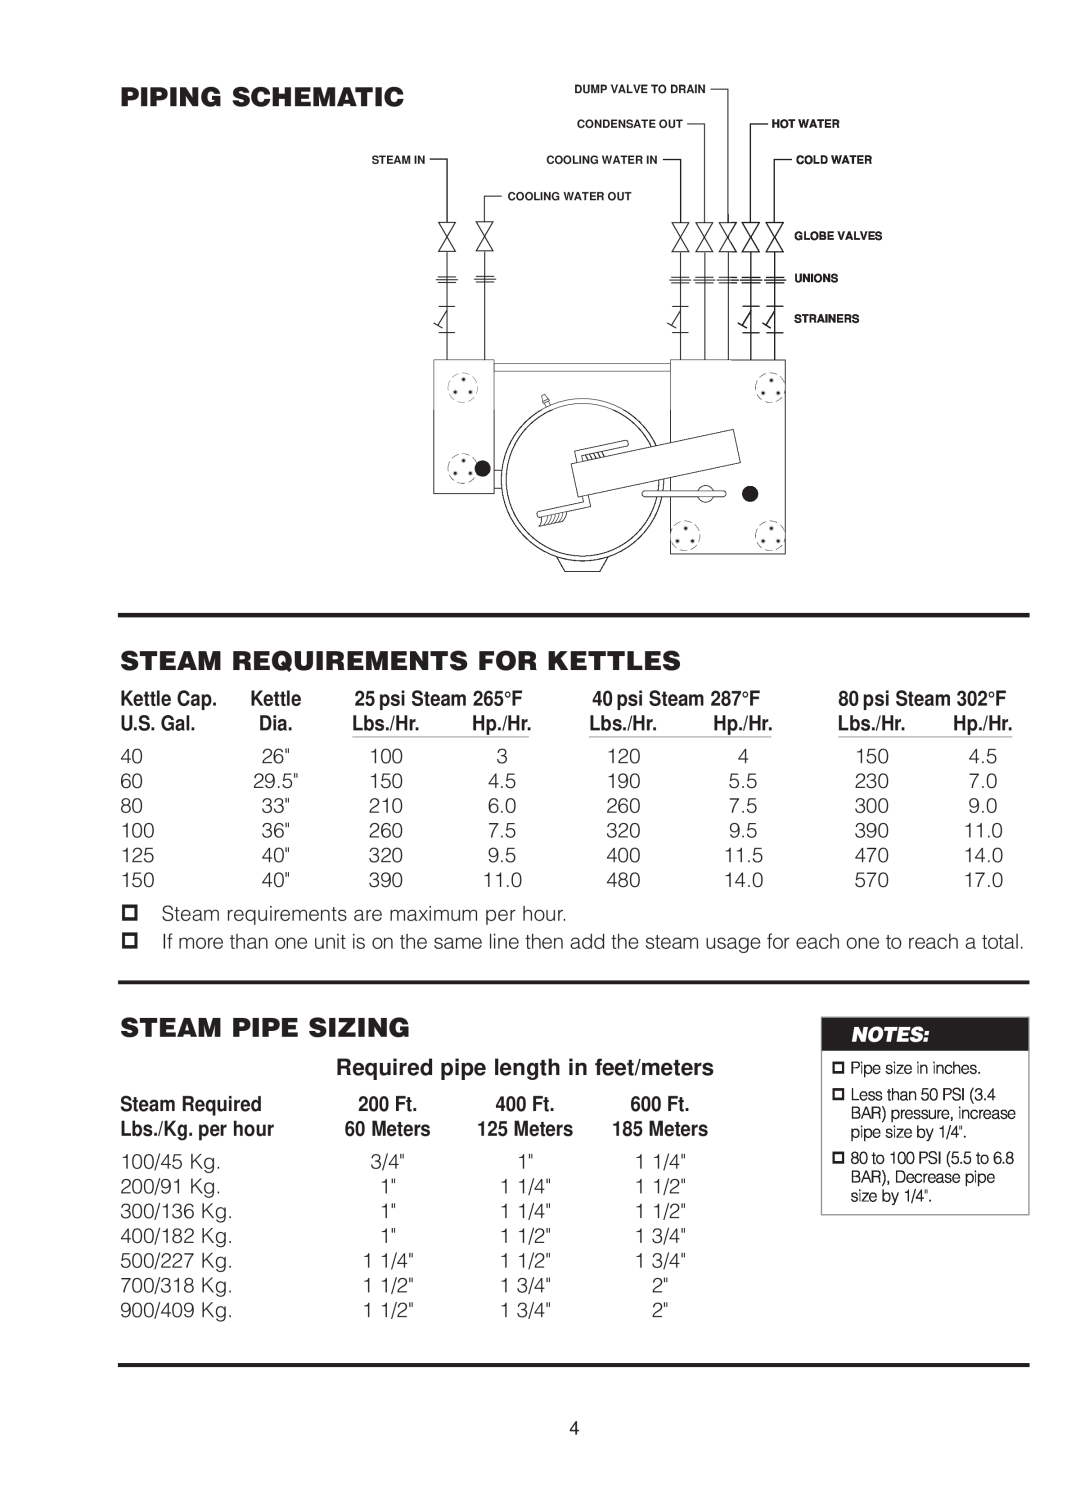 Cleveland Range MKDL-80-CC Piping Schematic, Steam Requirements For Kettles, Steam Pipe Sizing, Kettle Cap, psi Steam 265F 